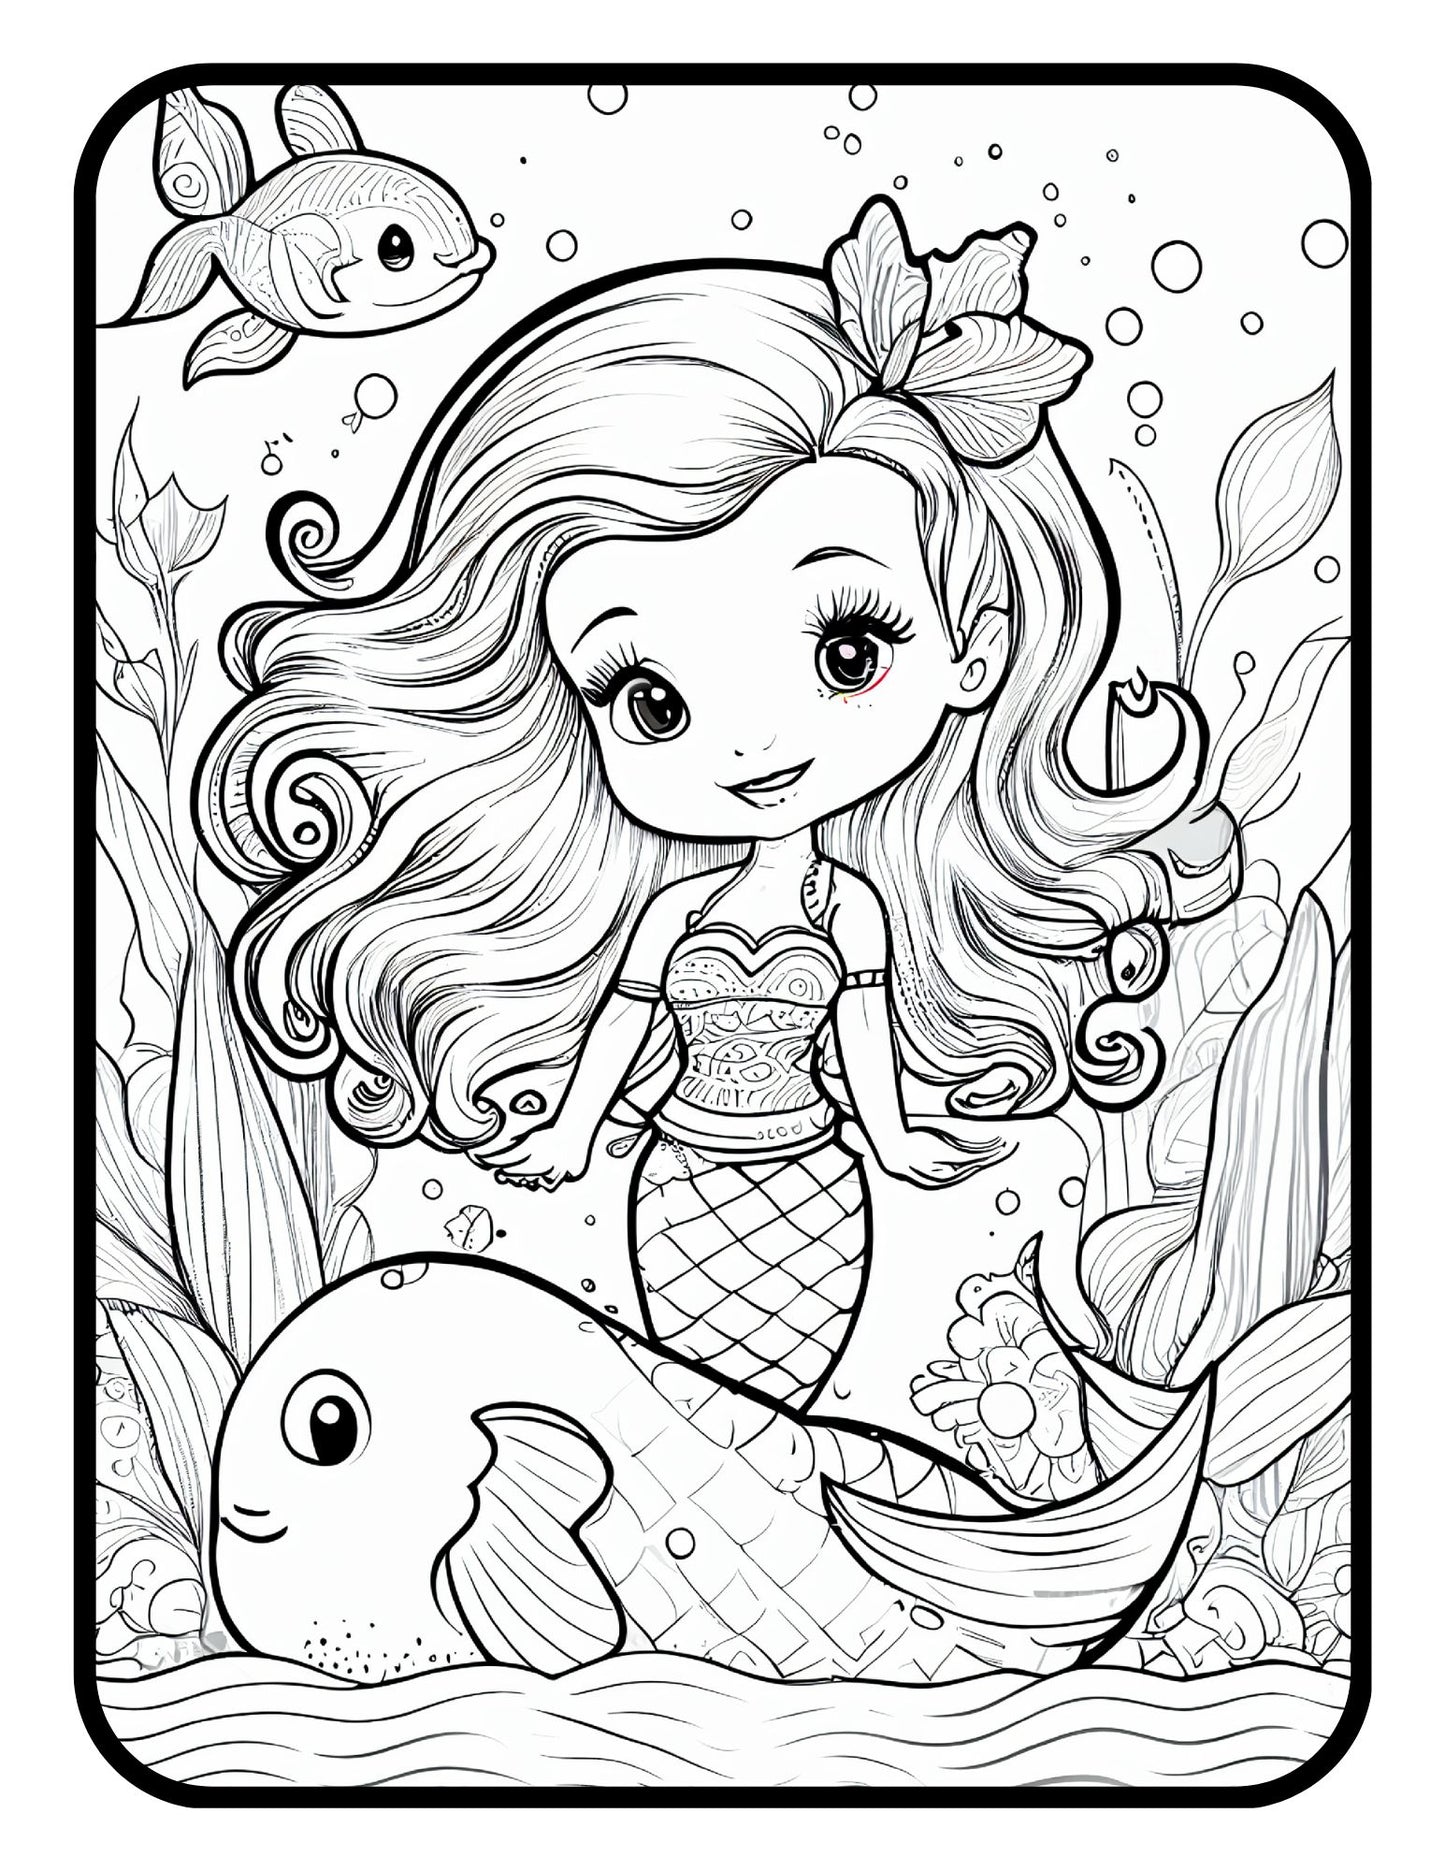 Mermaid Coloring Book for Kids Ages 4-8 Coloring Books Ages 6-8 Mermaid Books for Girls Mermaid Activity Gift Book for Kids Coloring Book